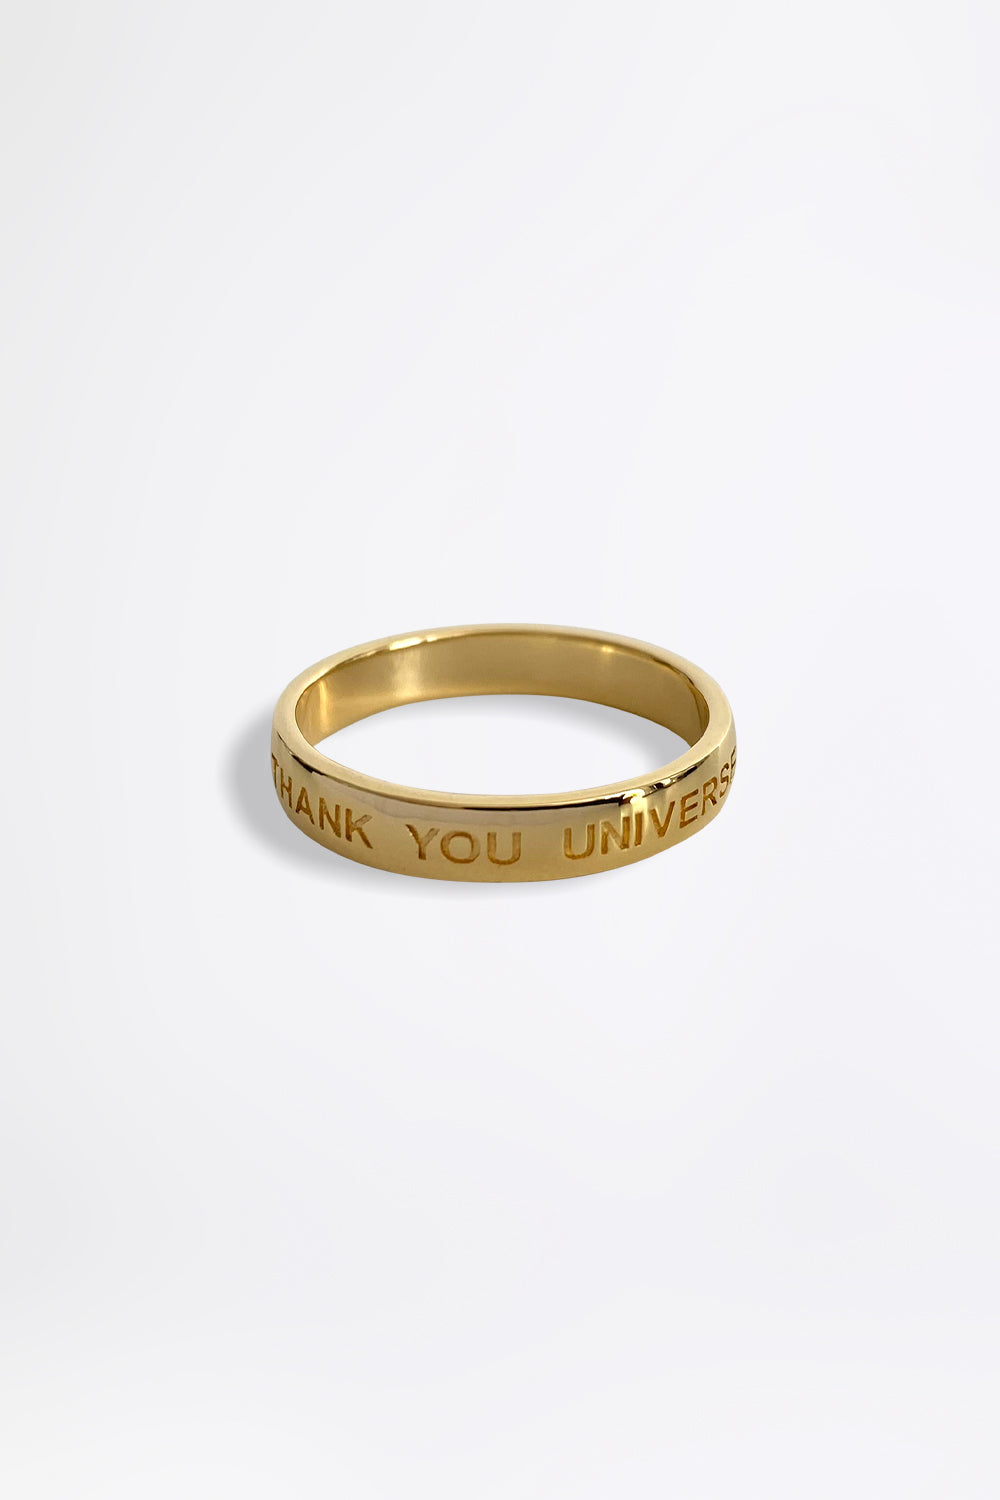 THANK YOU UNIVERSE - SIMPLE - Gold Ring